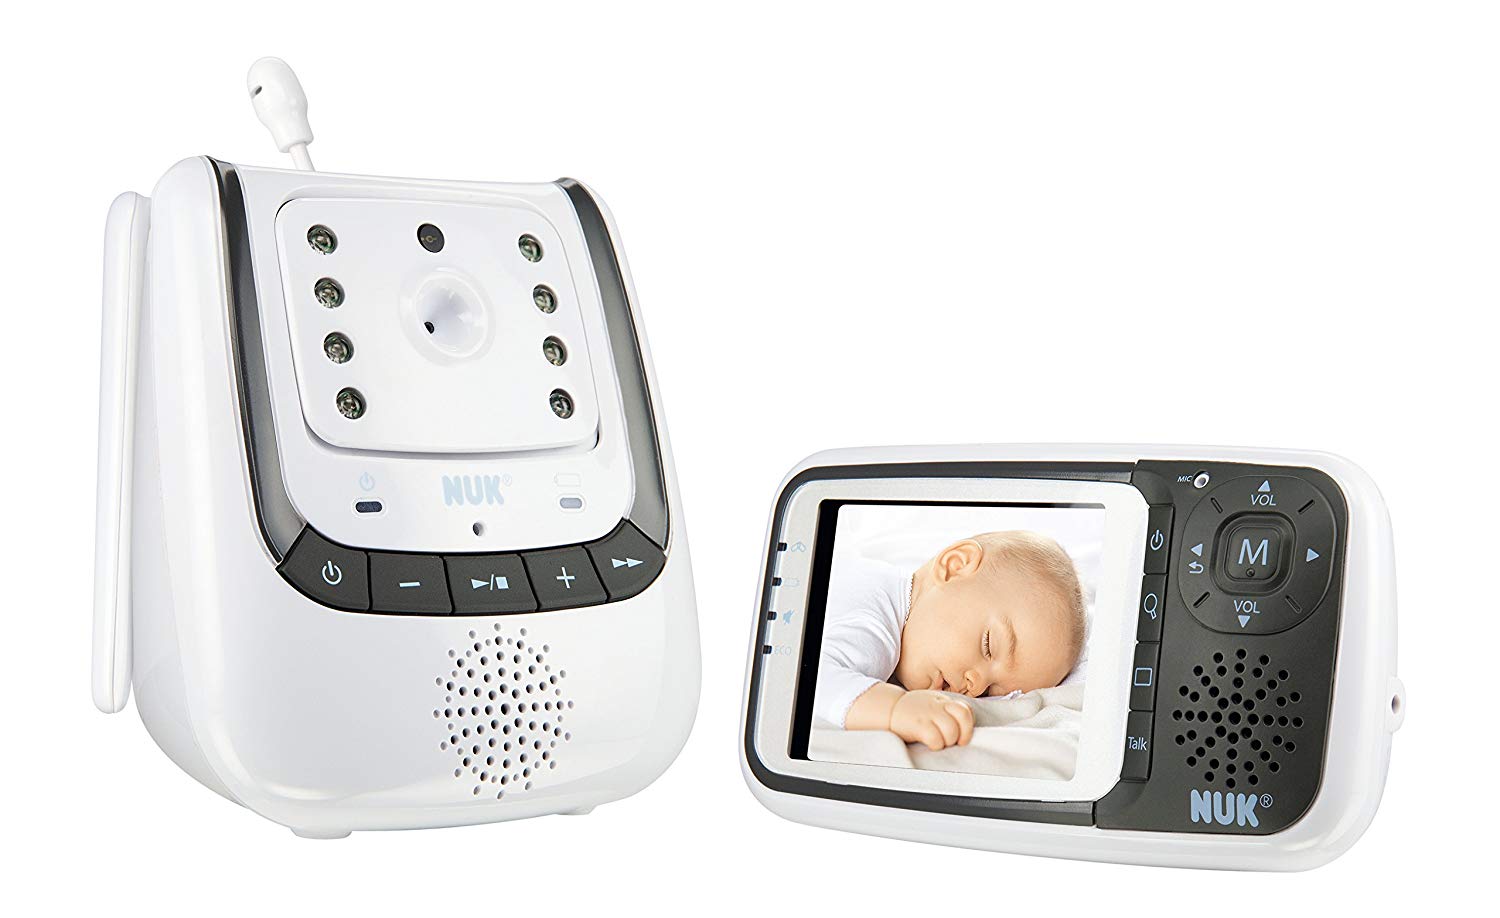 NUK baby monitor with camera Eco Control + video, with intercom function & temperature sensor, free of high-frequency radiation in Eco mode